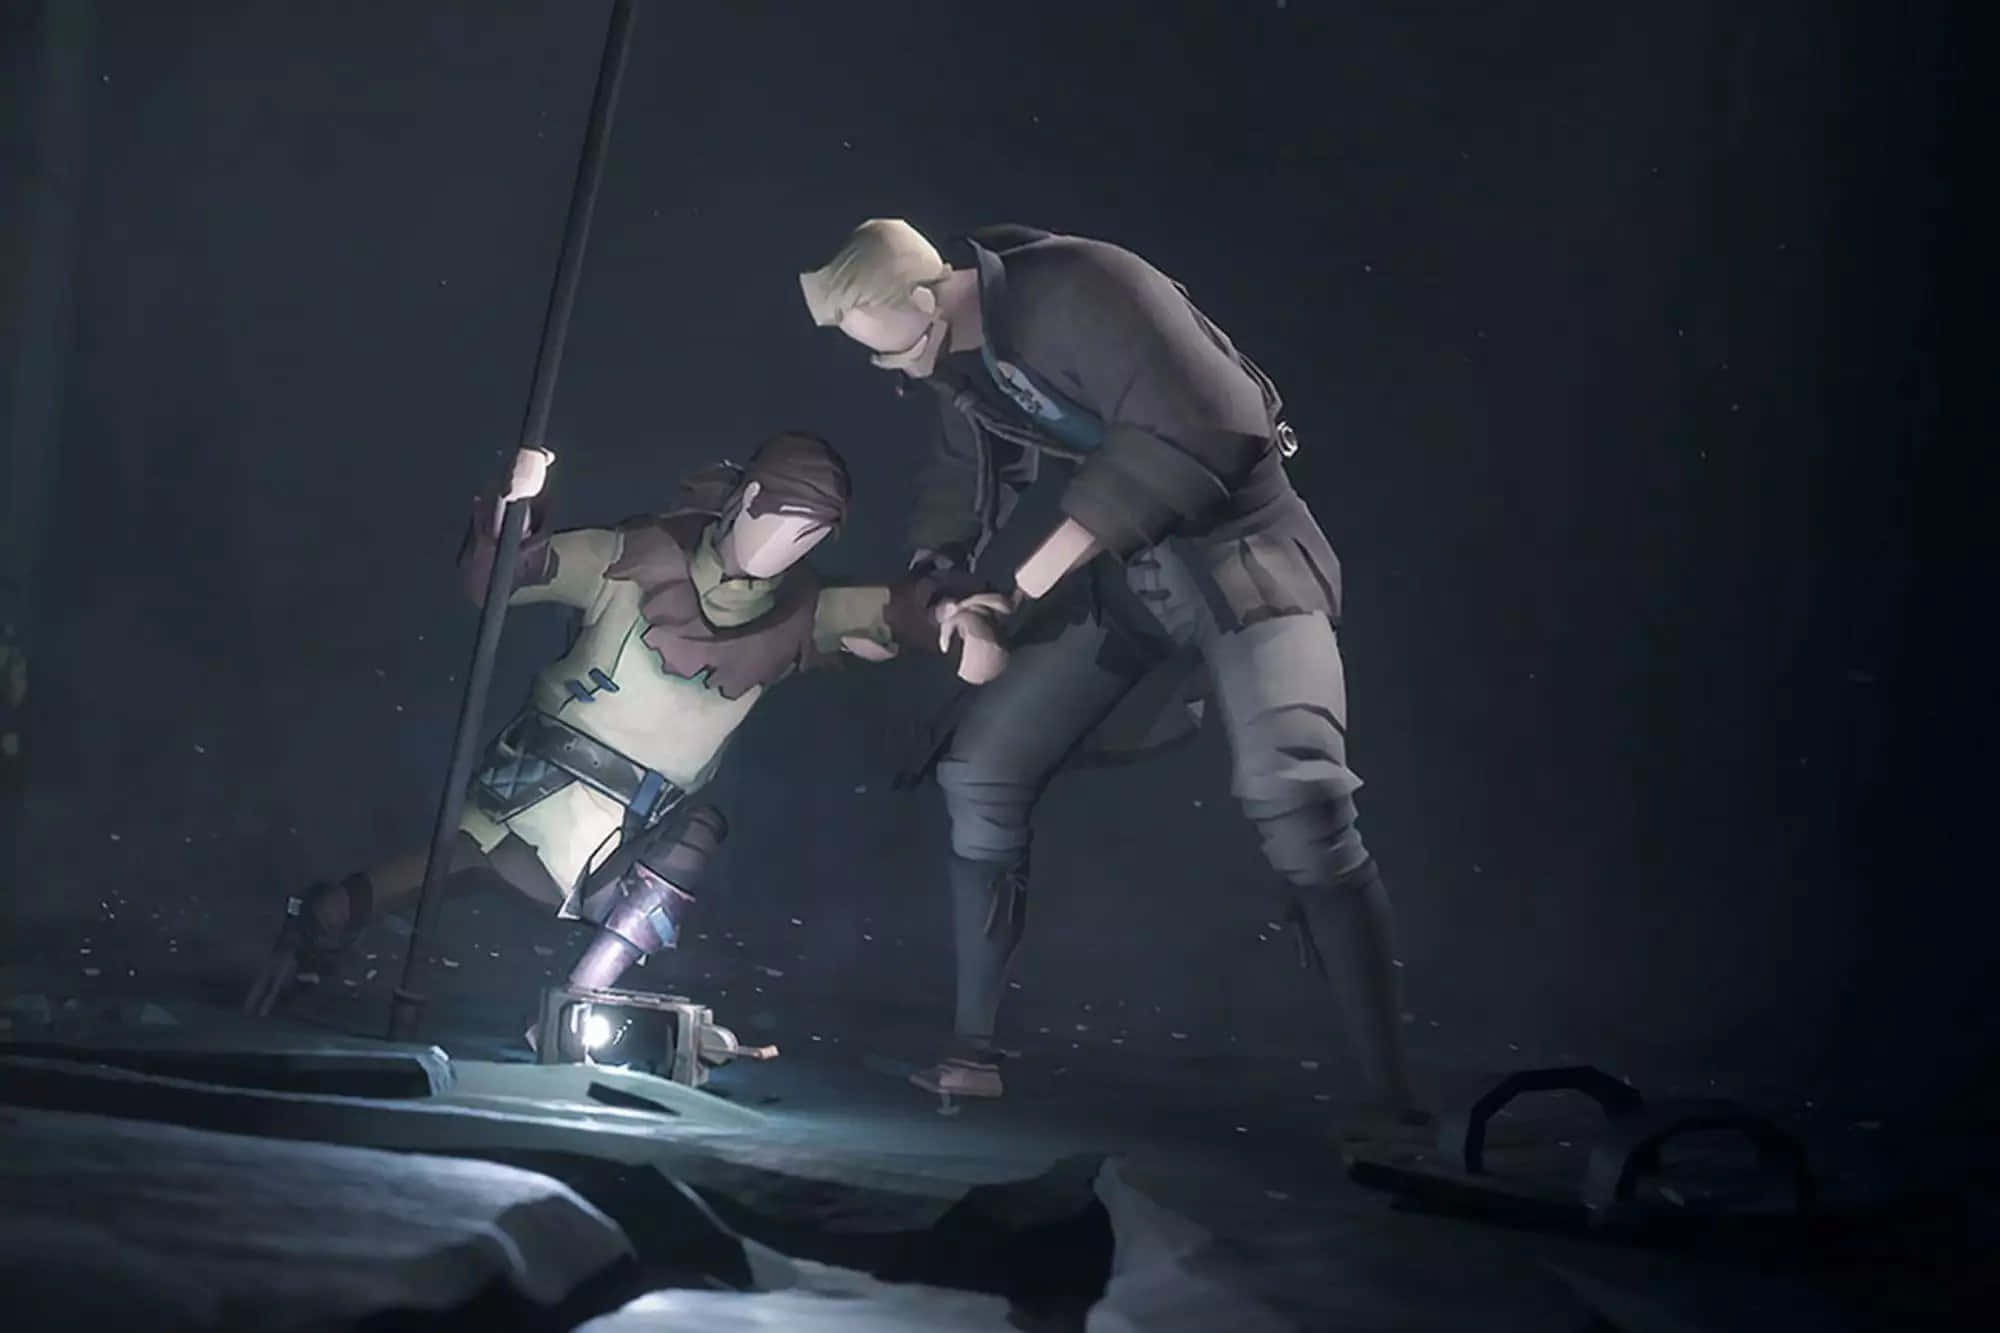 Explore a desolate world filled with mystery and danger in Ashen Wallpaper